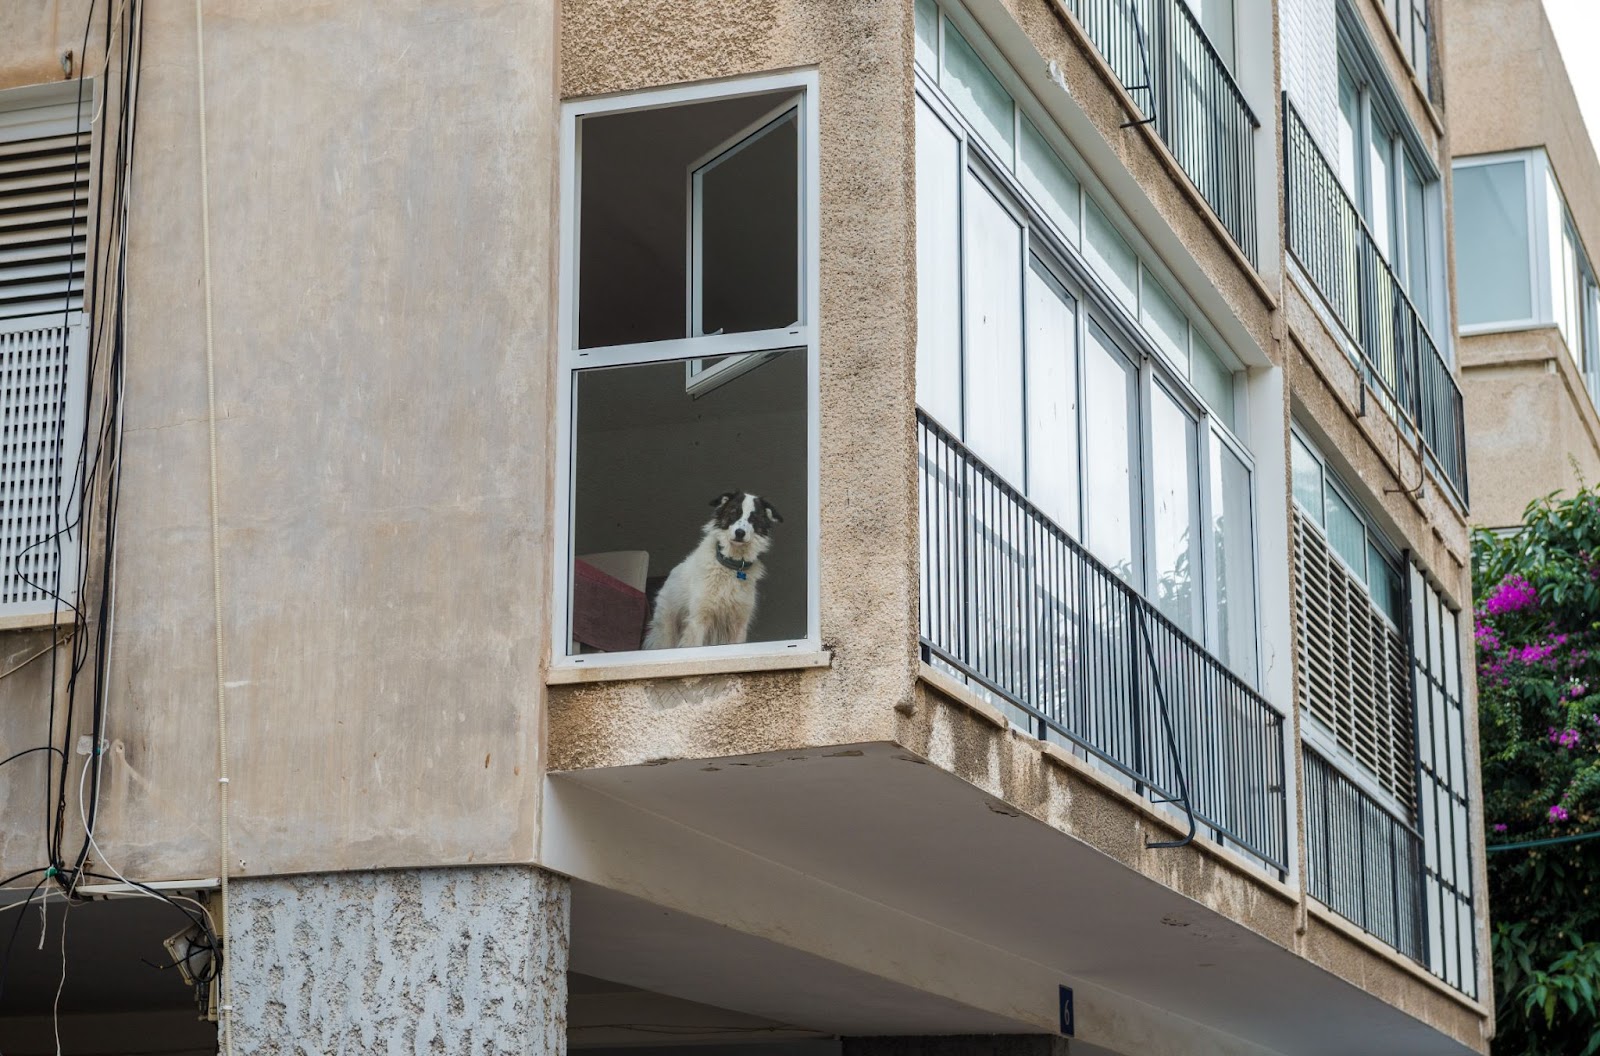 An apartment dog looking out the window.